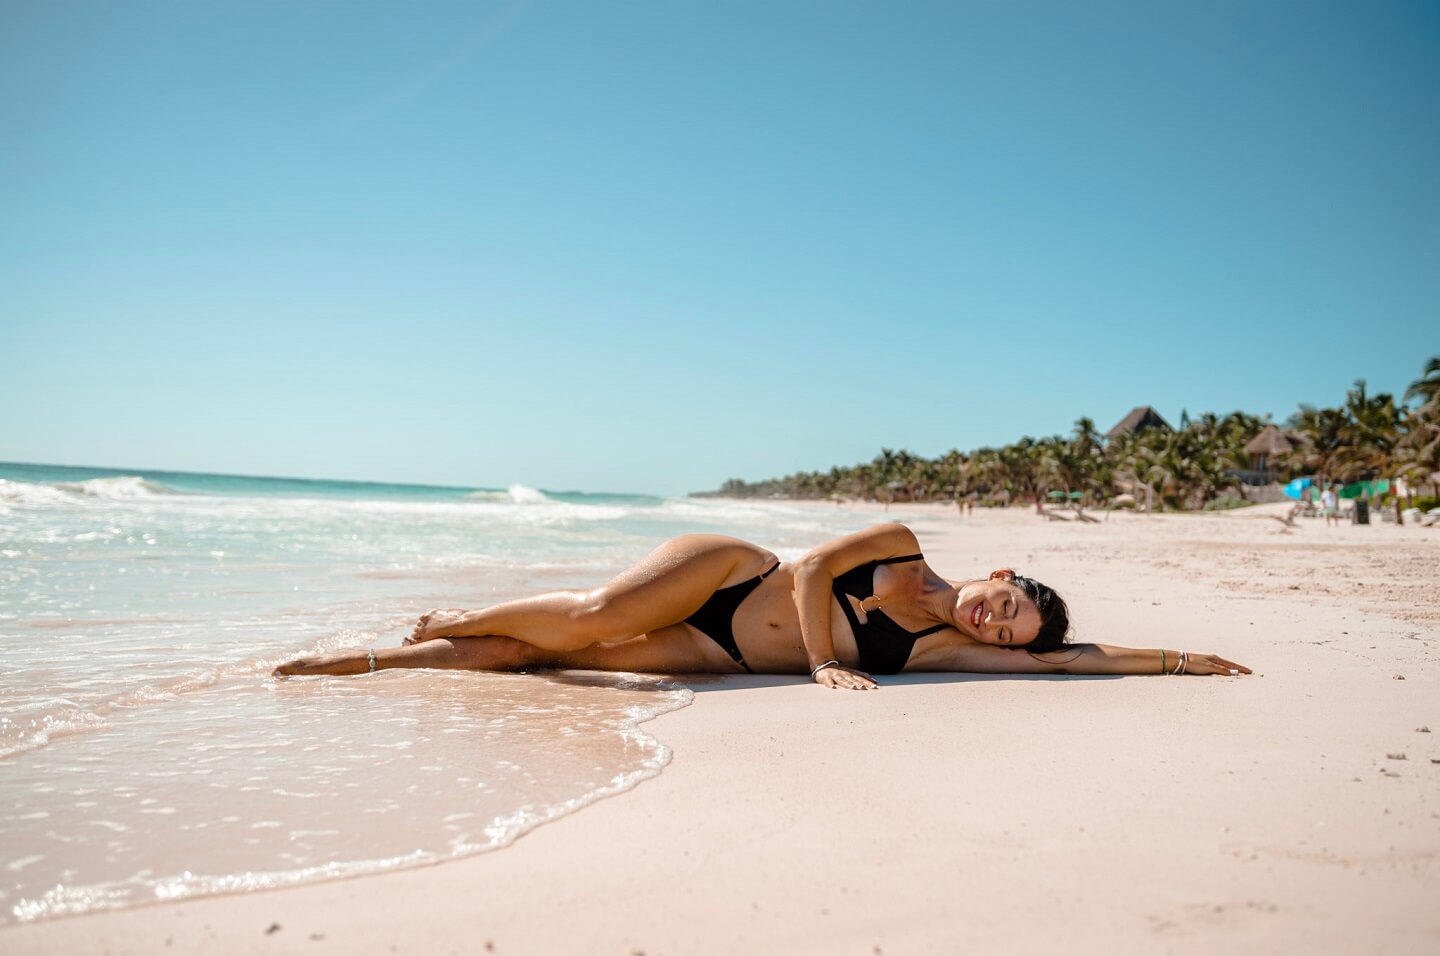 60 Instagram Captions for Beach Pics that will Make Waves - xoxoBella